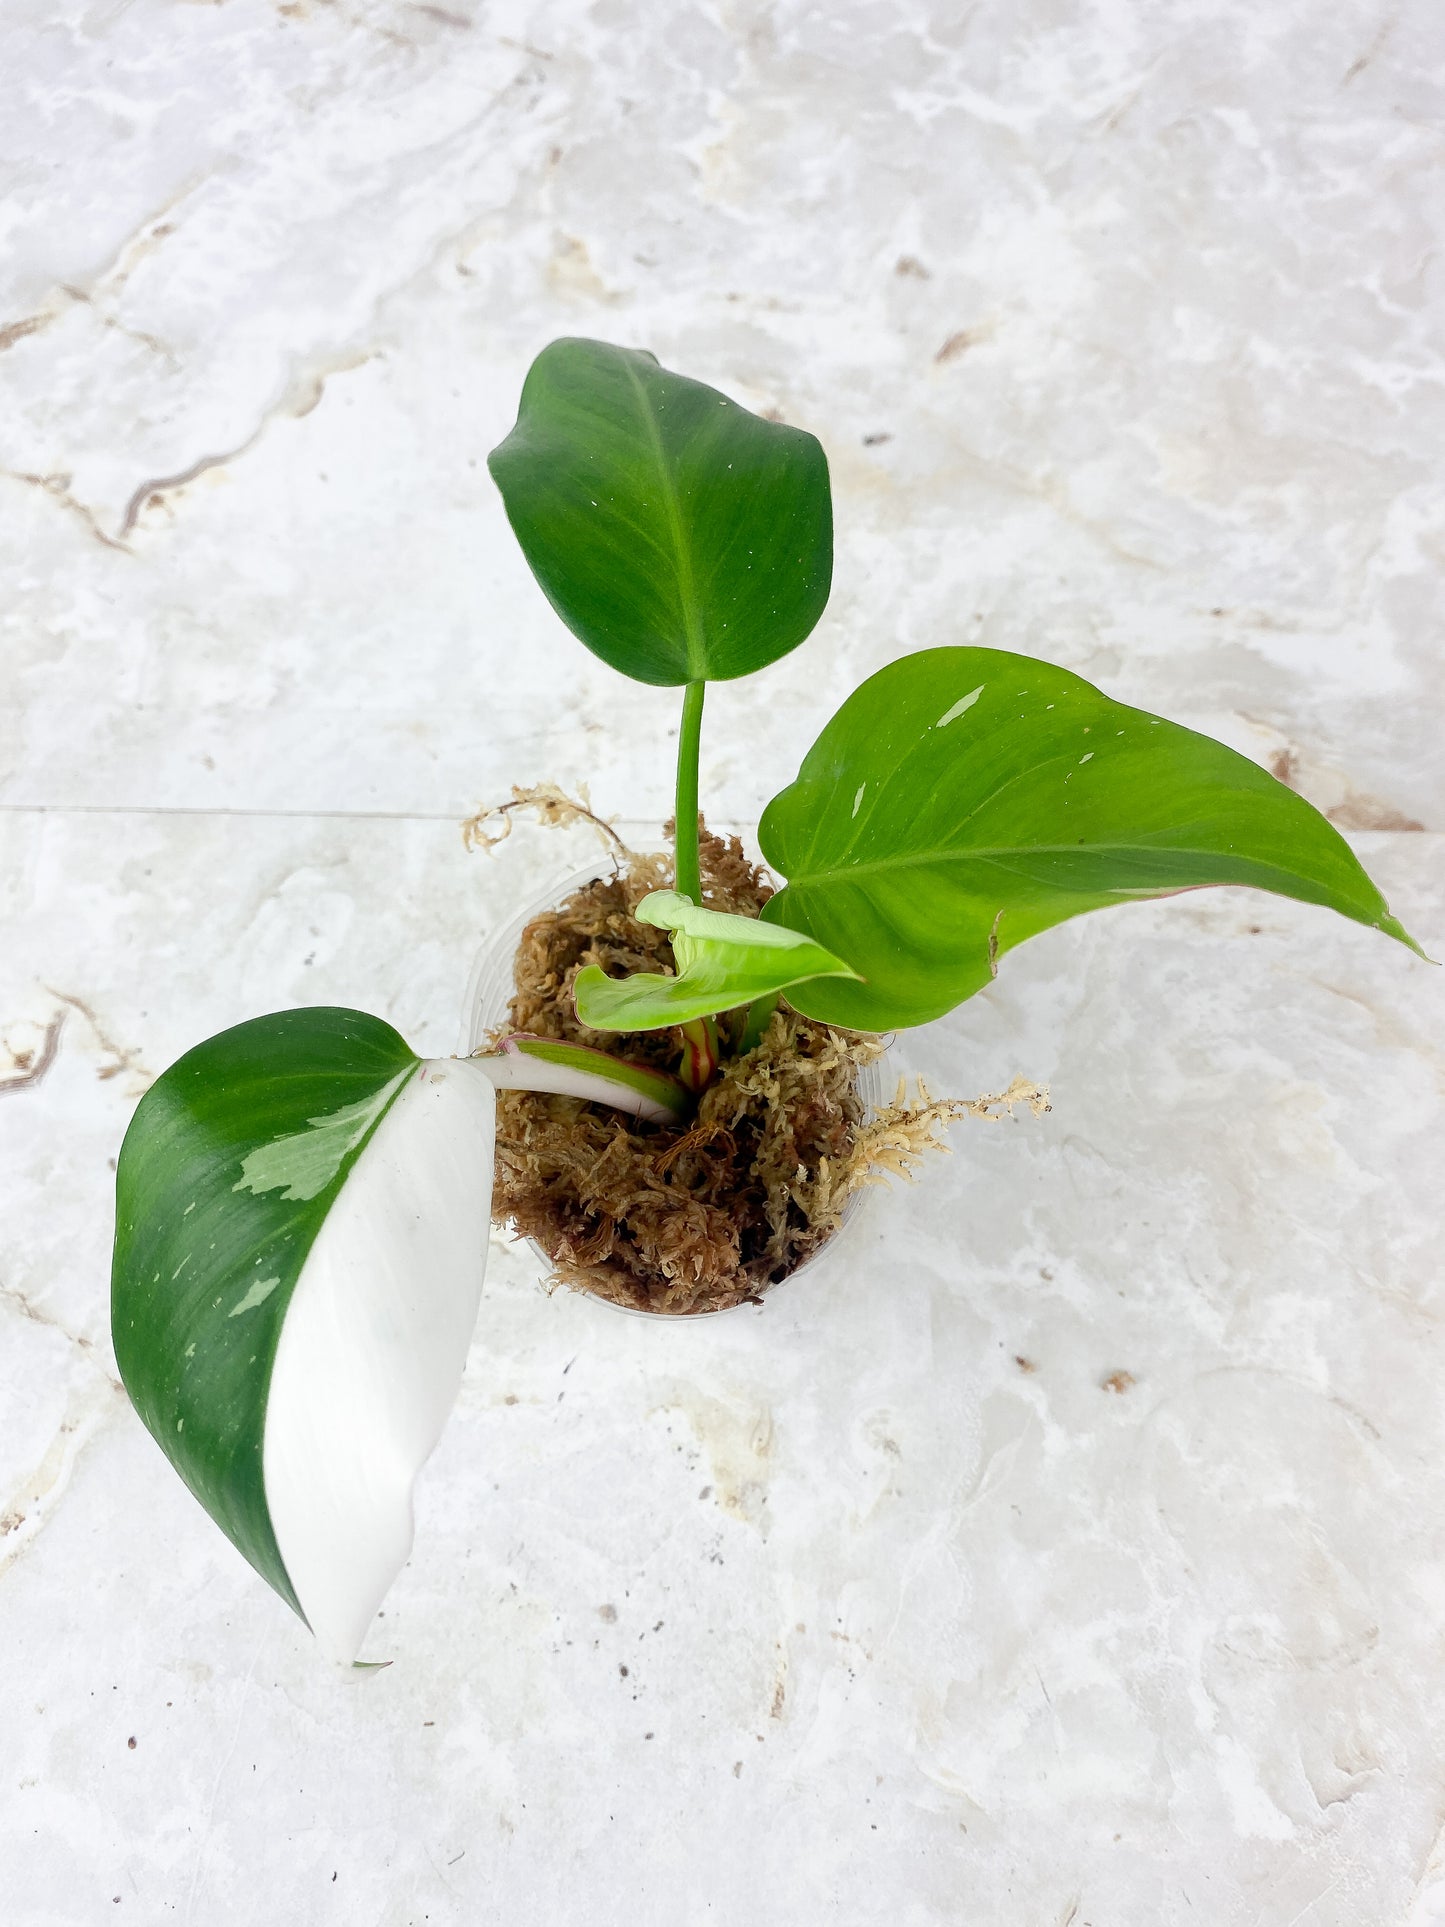 Philodendron White Princess Rooting 4 leaves, 1 sprout. Top cutting